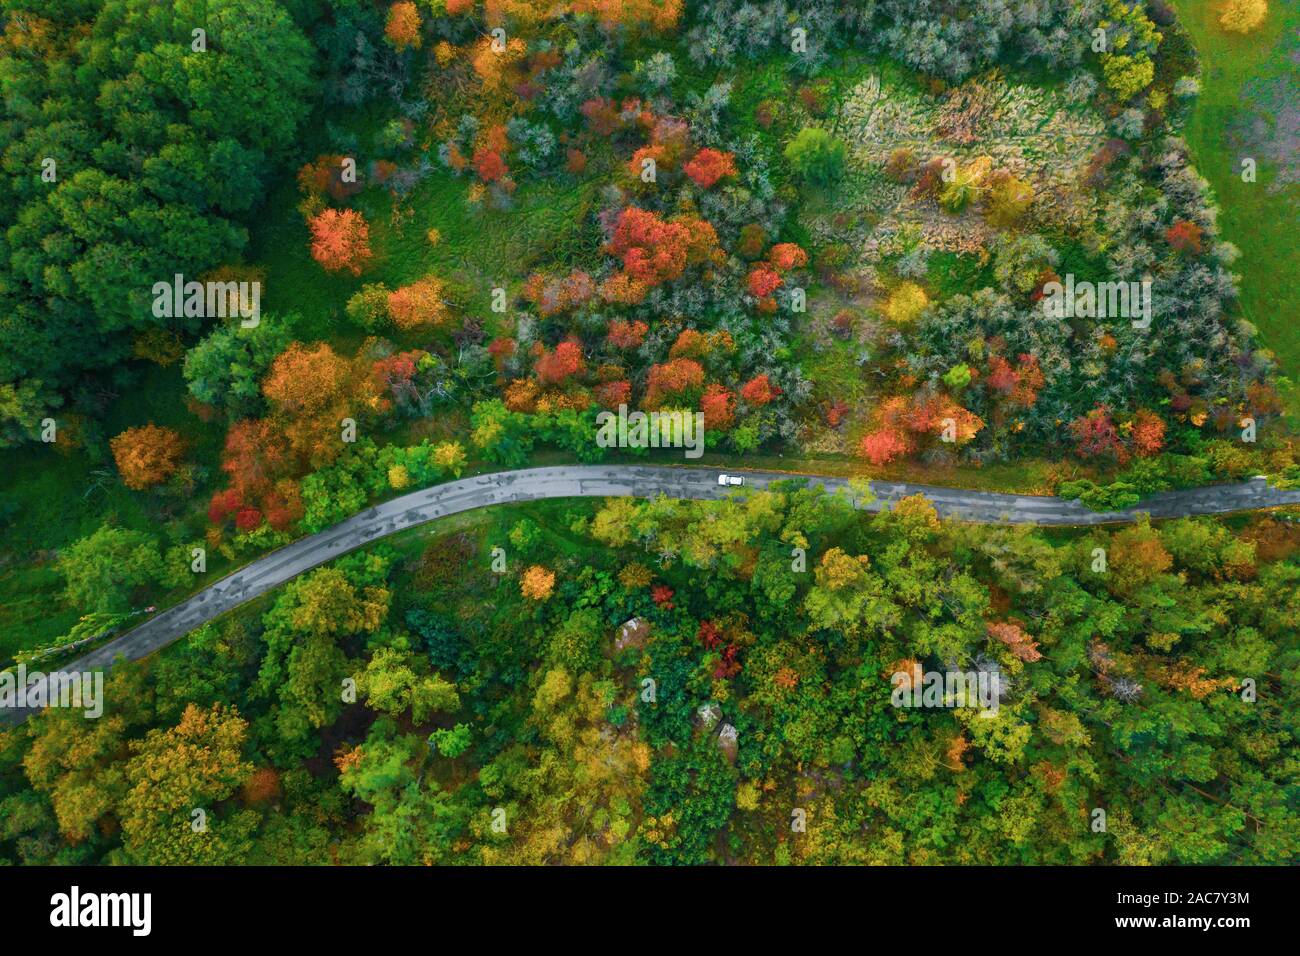 Stunning aerial view of road with cars between colorful autumn forest Stock Photo